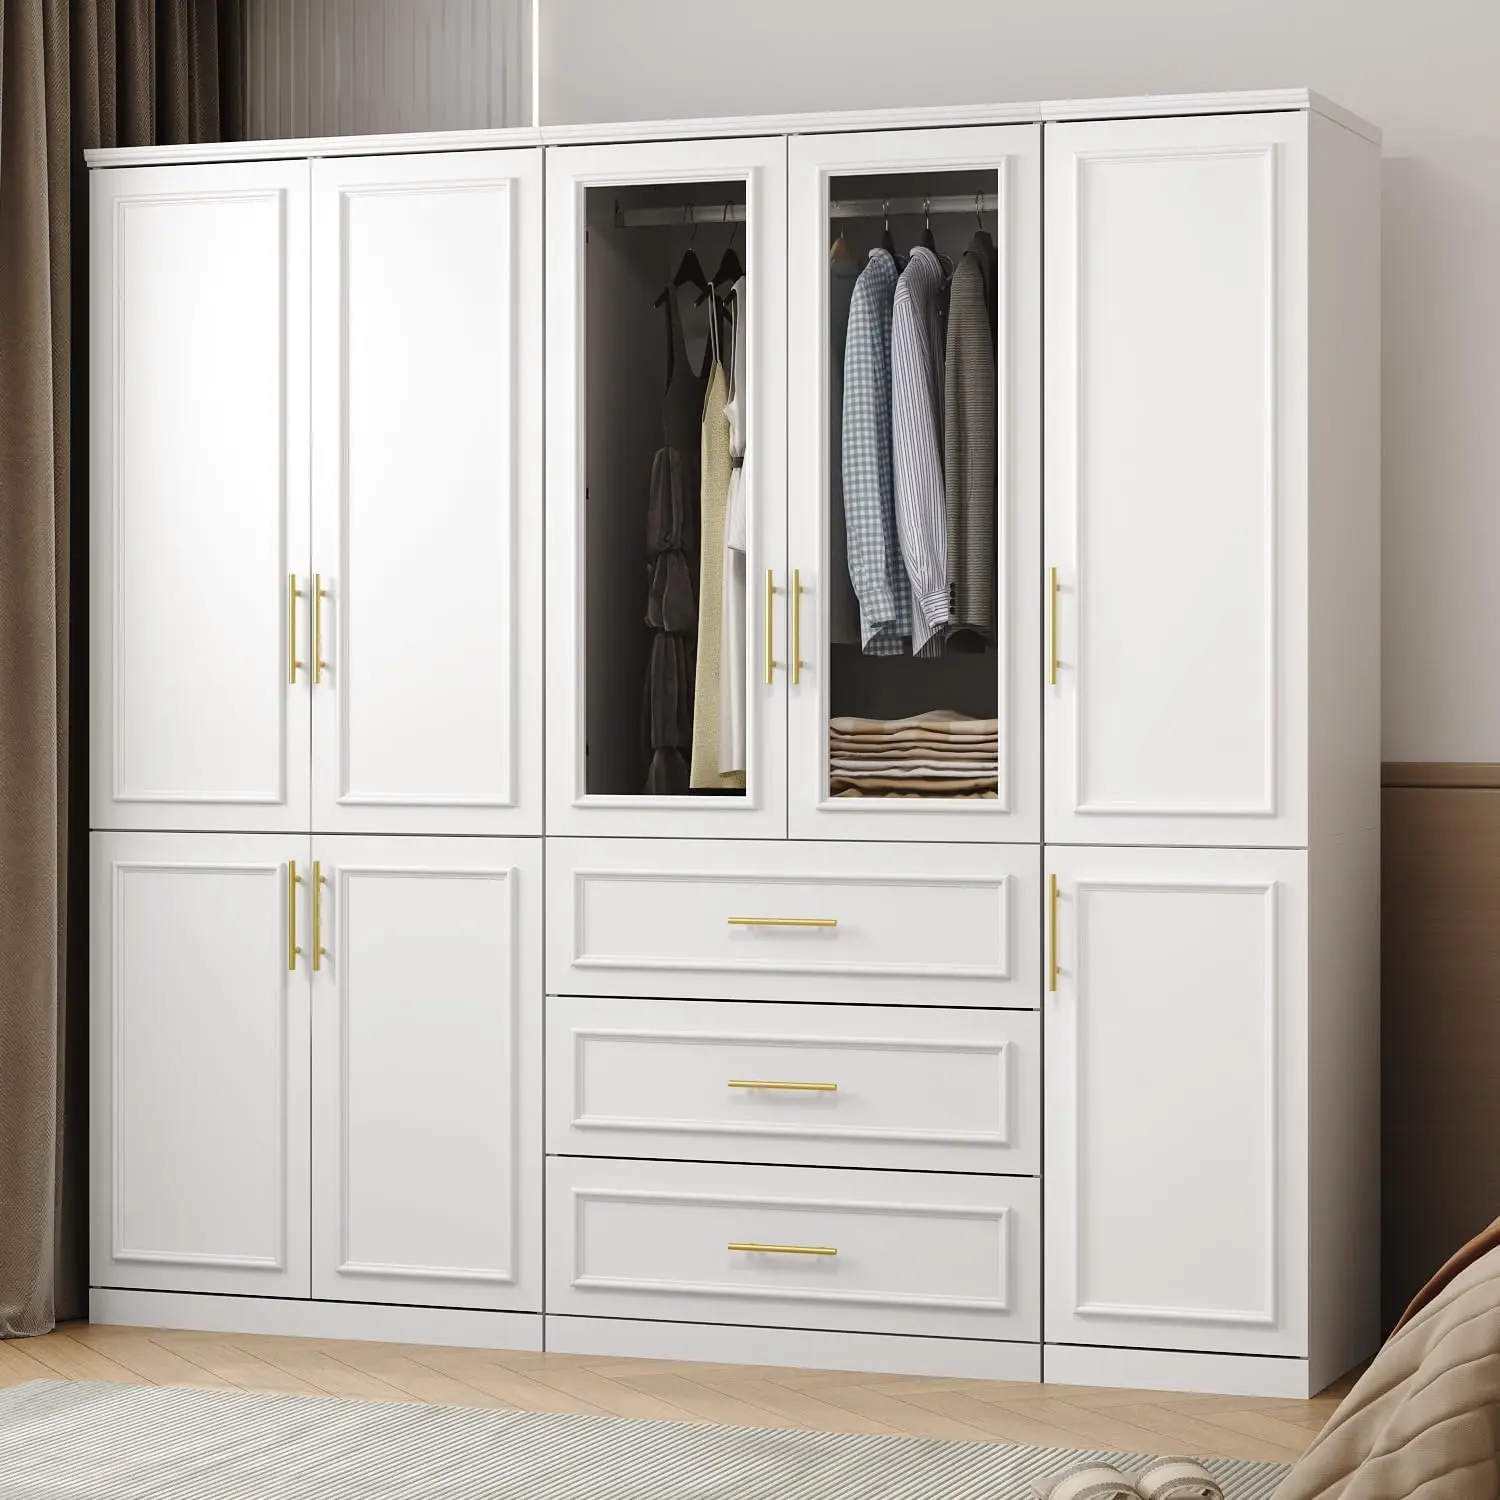 

Extra Wide Wardrobe Armoire with 2/4/8 Doors,Drawers,Storage Shelves & Hanging Rods,Wooden Closet Cabinet for Bedroom,White